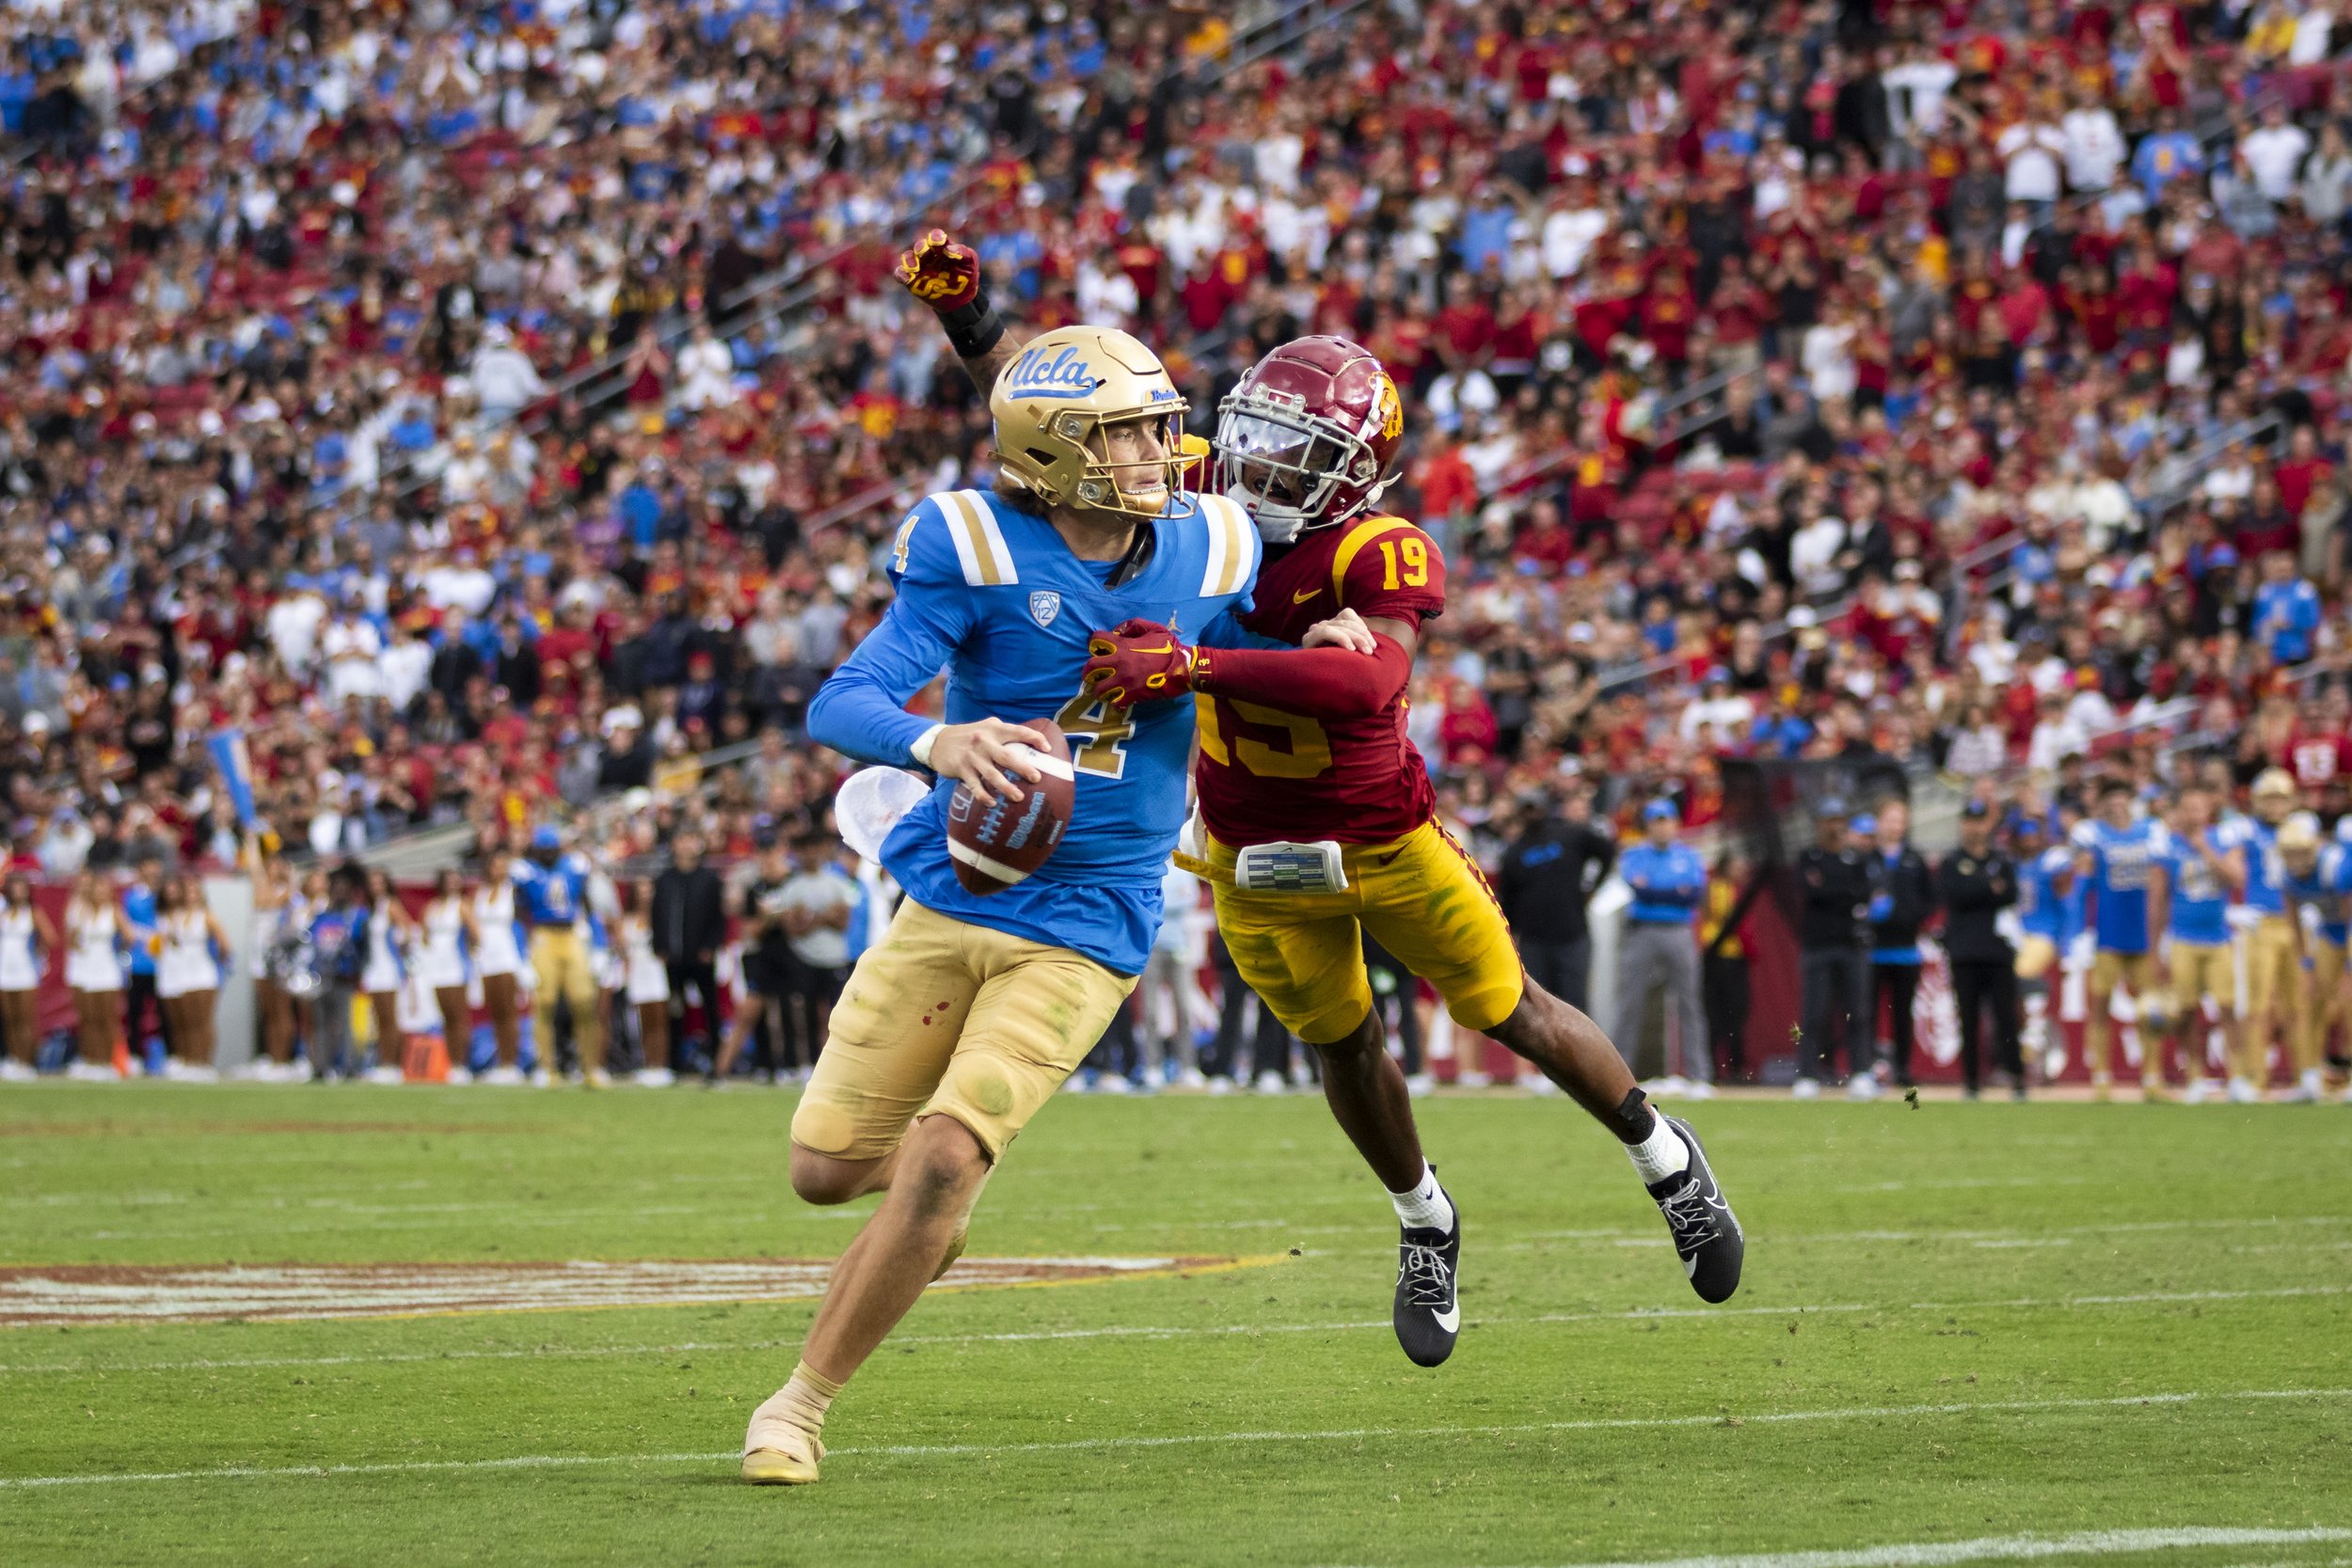  University of California, Los Angeles (UCLA) Bruin quarterback Ethan Garbers (left) being tackled by University of Southern California (USC) Trojan safety Jaylin Smith (right) during the third quarter of a football game at the Los Angeles Memorial C